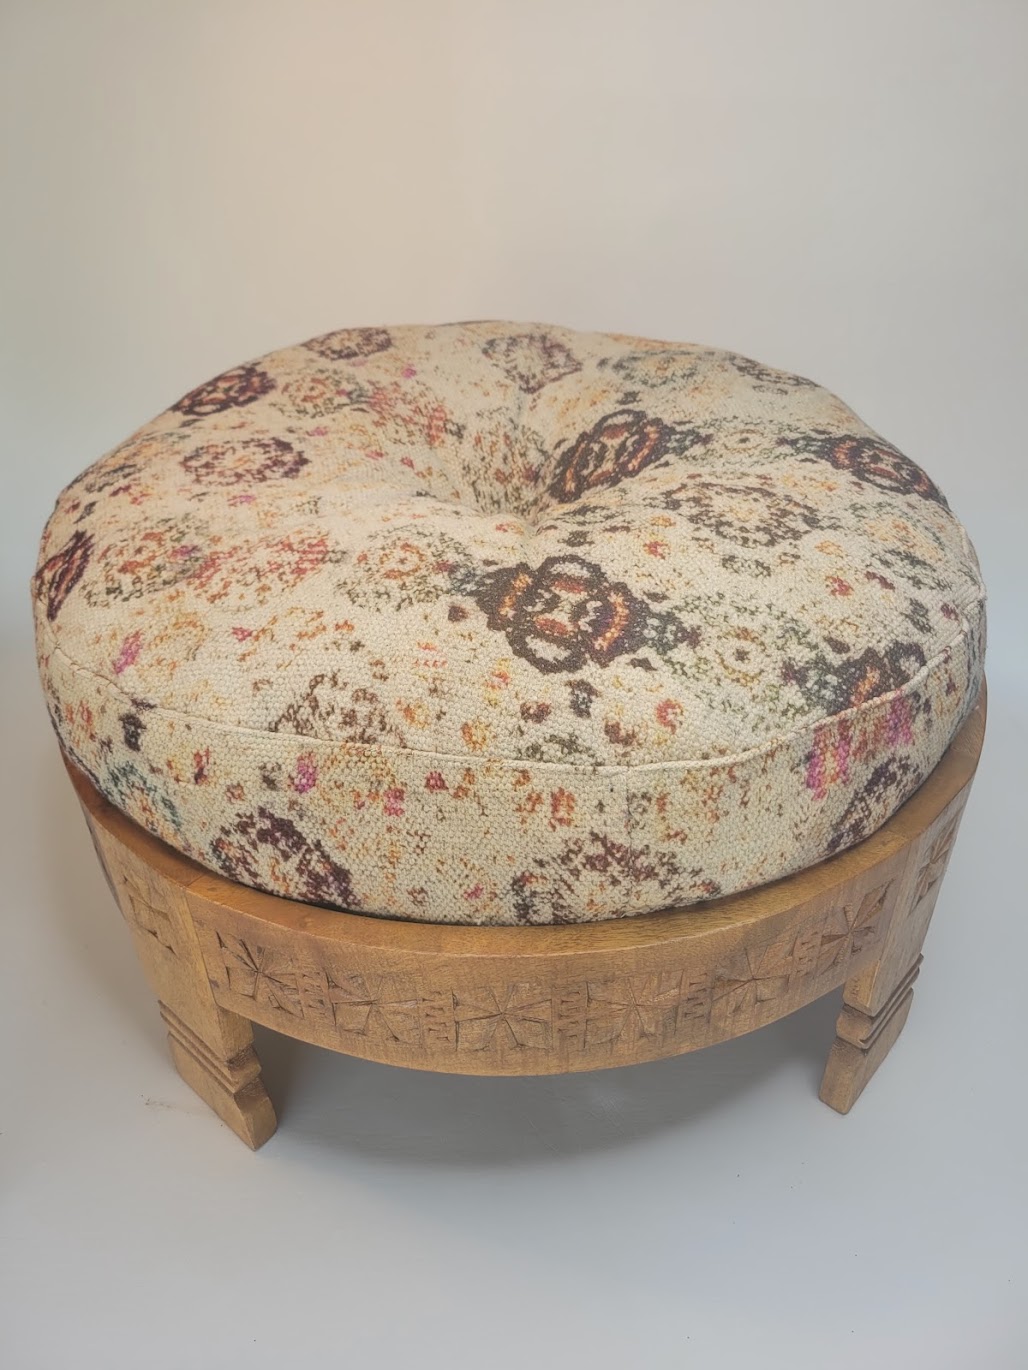 Round Rustic Ornate Patterned Ottoman